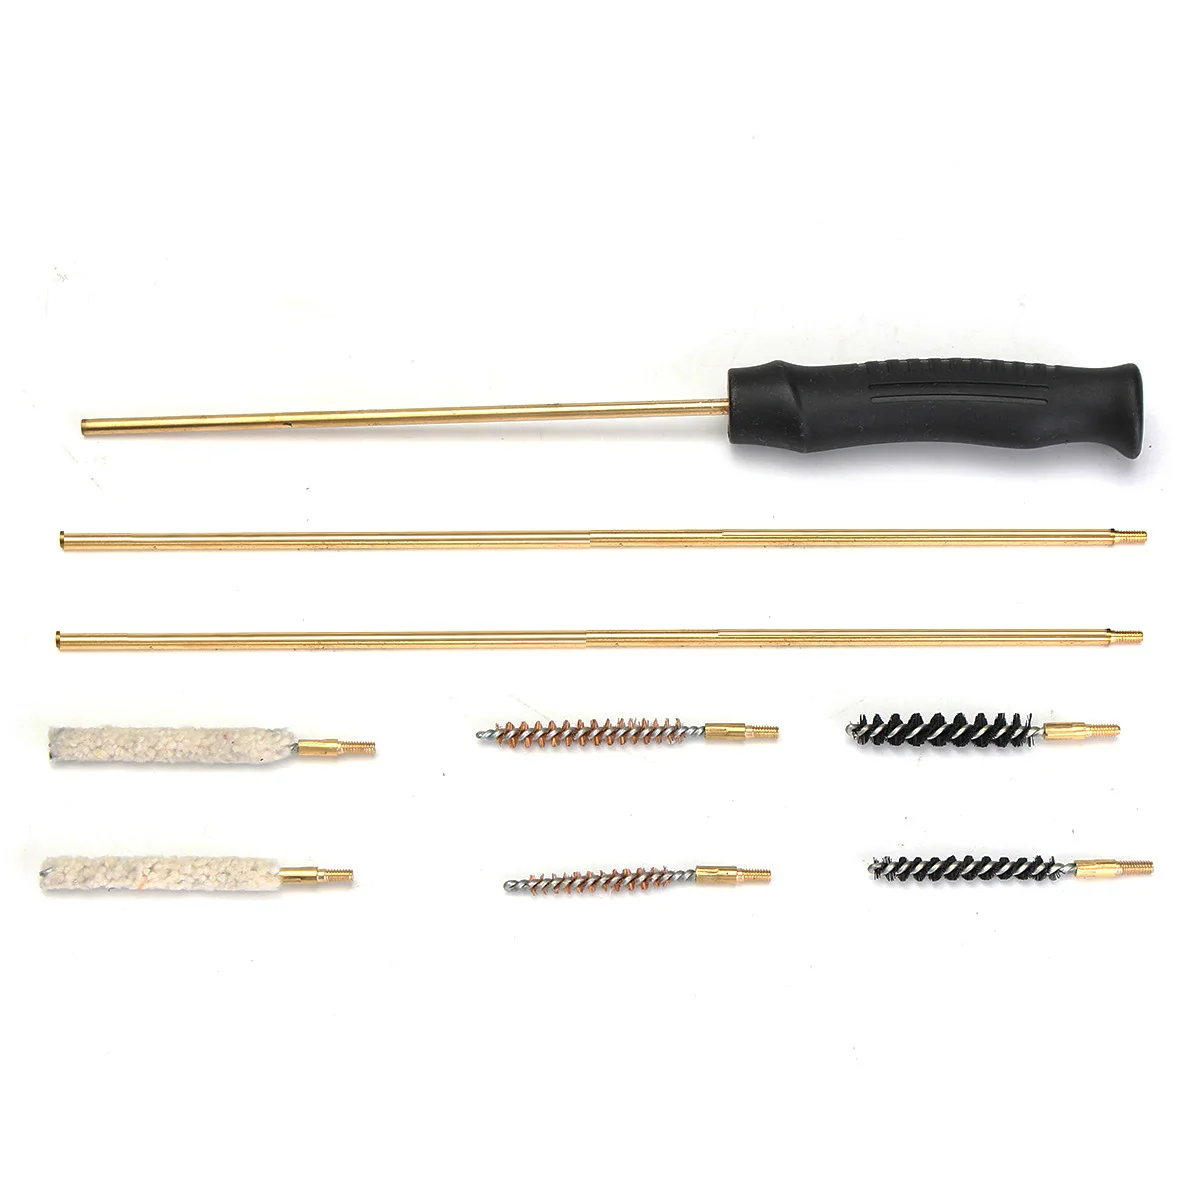 

9PCS Hunting Barrel Cleaning Tool Kit Air Rimfire 177/22 Rifle Pistol Airgun Brushes Rods with Storage Case